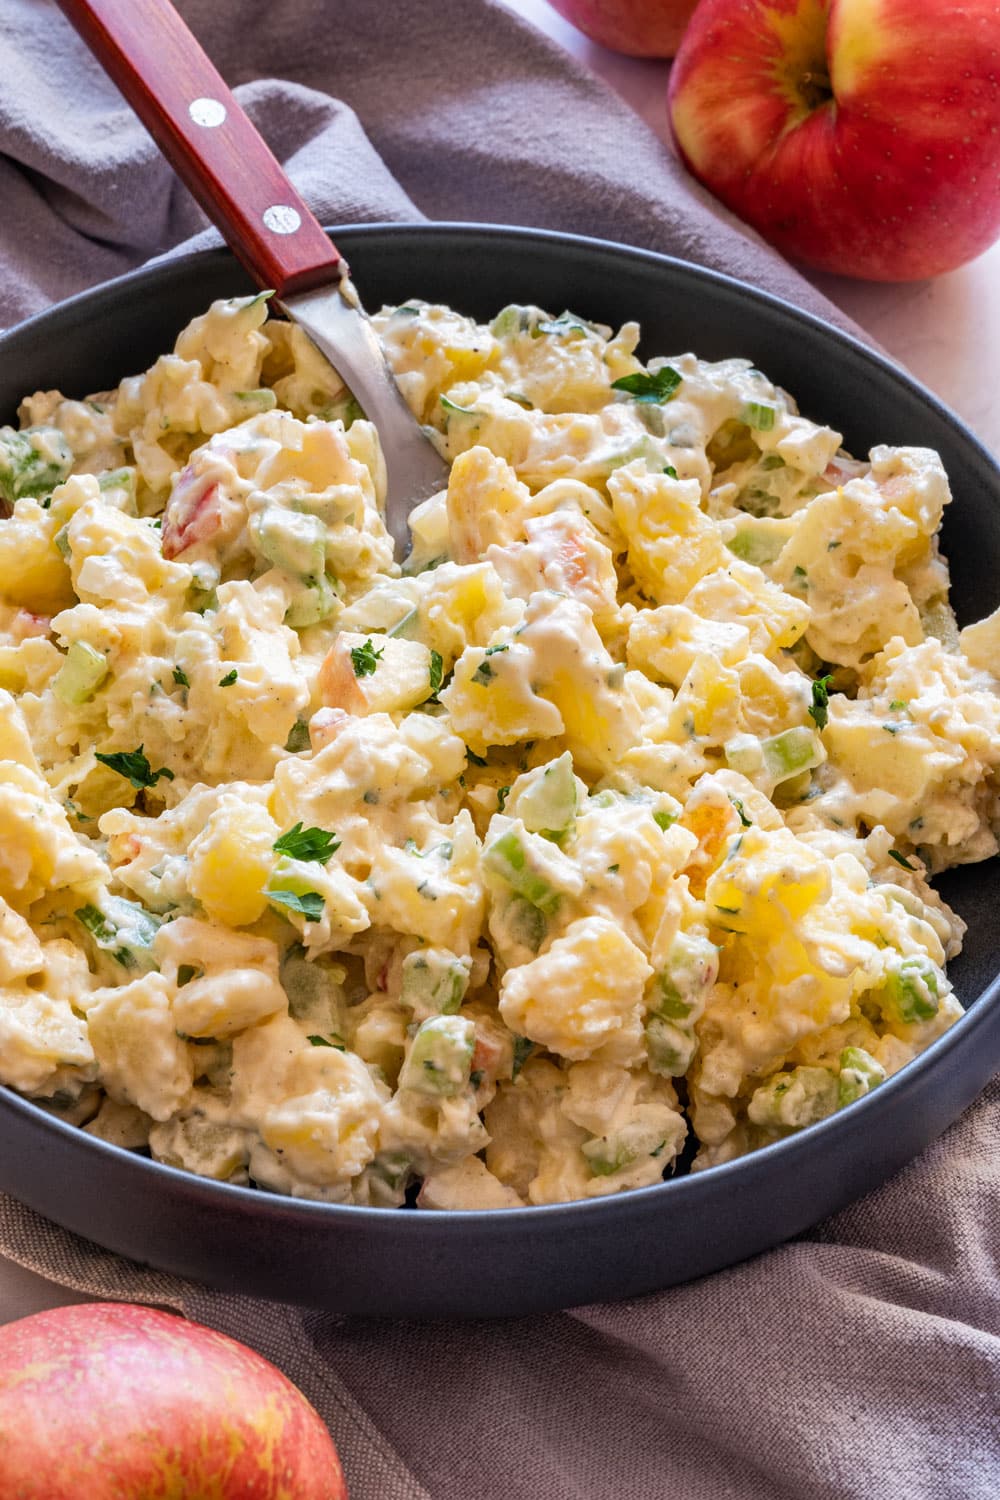 Fresh potato salad on the plate with fork in.